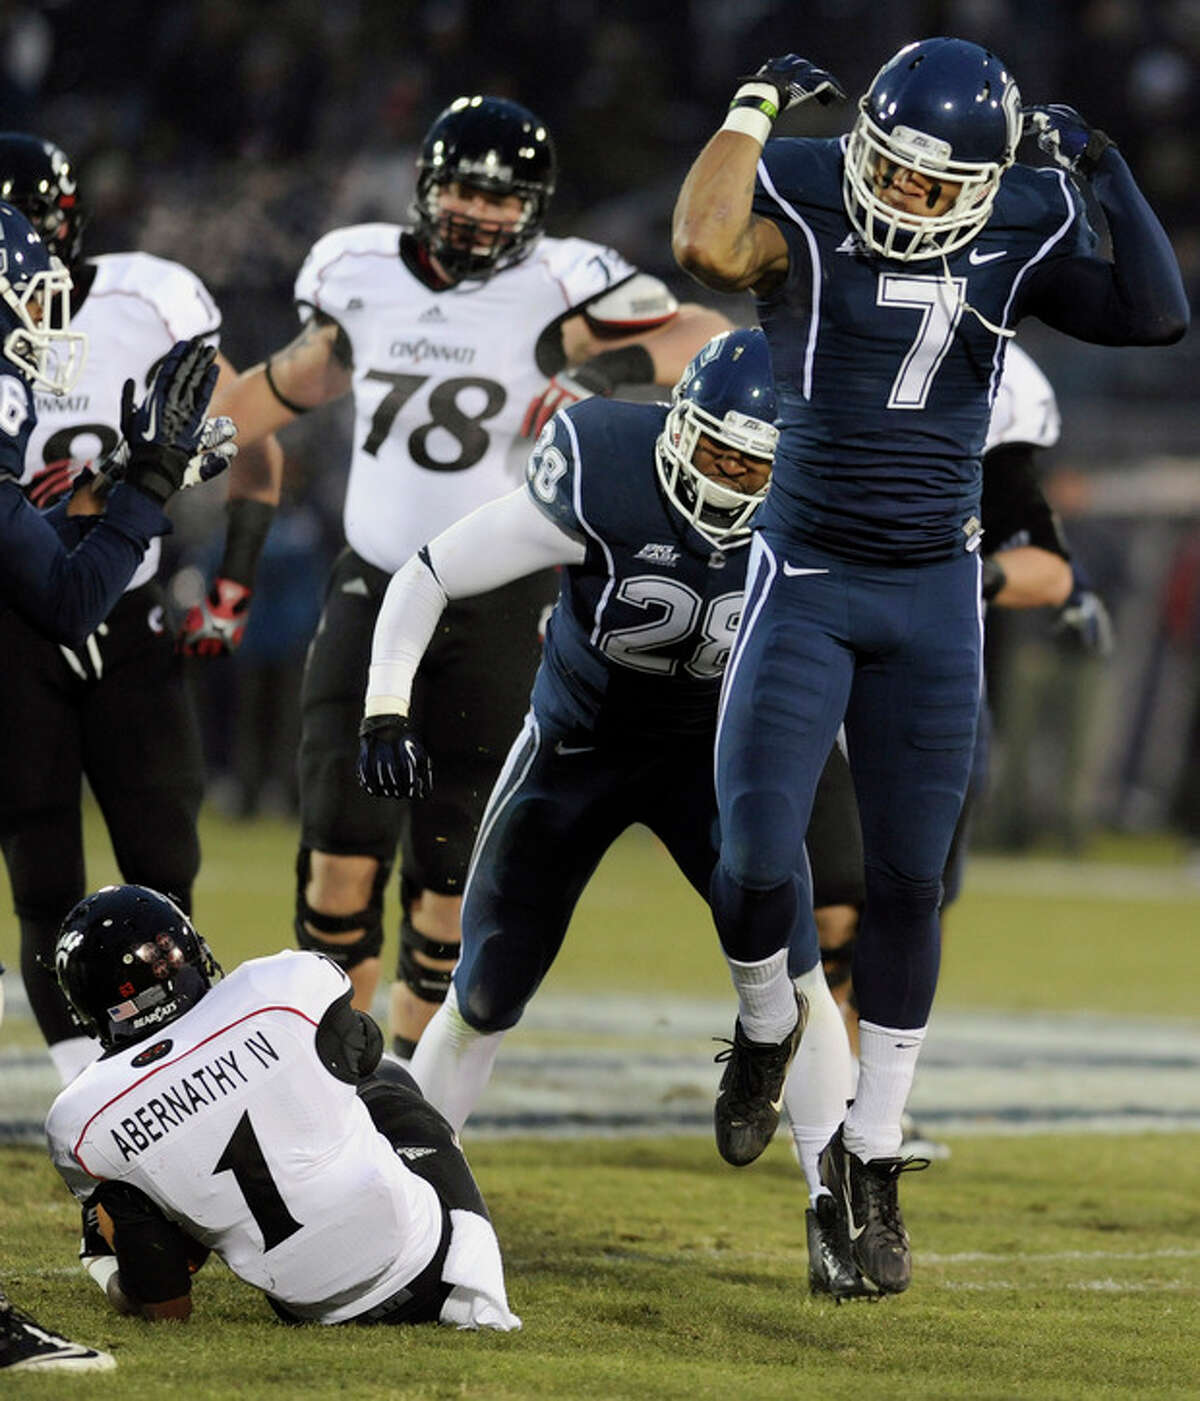 Connecticut cornerback Dwayne Gratz (7), right, reacts after tackling Cincinnati running back Ralph Abernathy (1), left, during the first half of an NCAA college football game at Rentschler Field in East Hartford, Conn., Saturday, Dec. 1, 2012. (AP Photo/Jessica Hill)